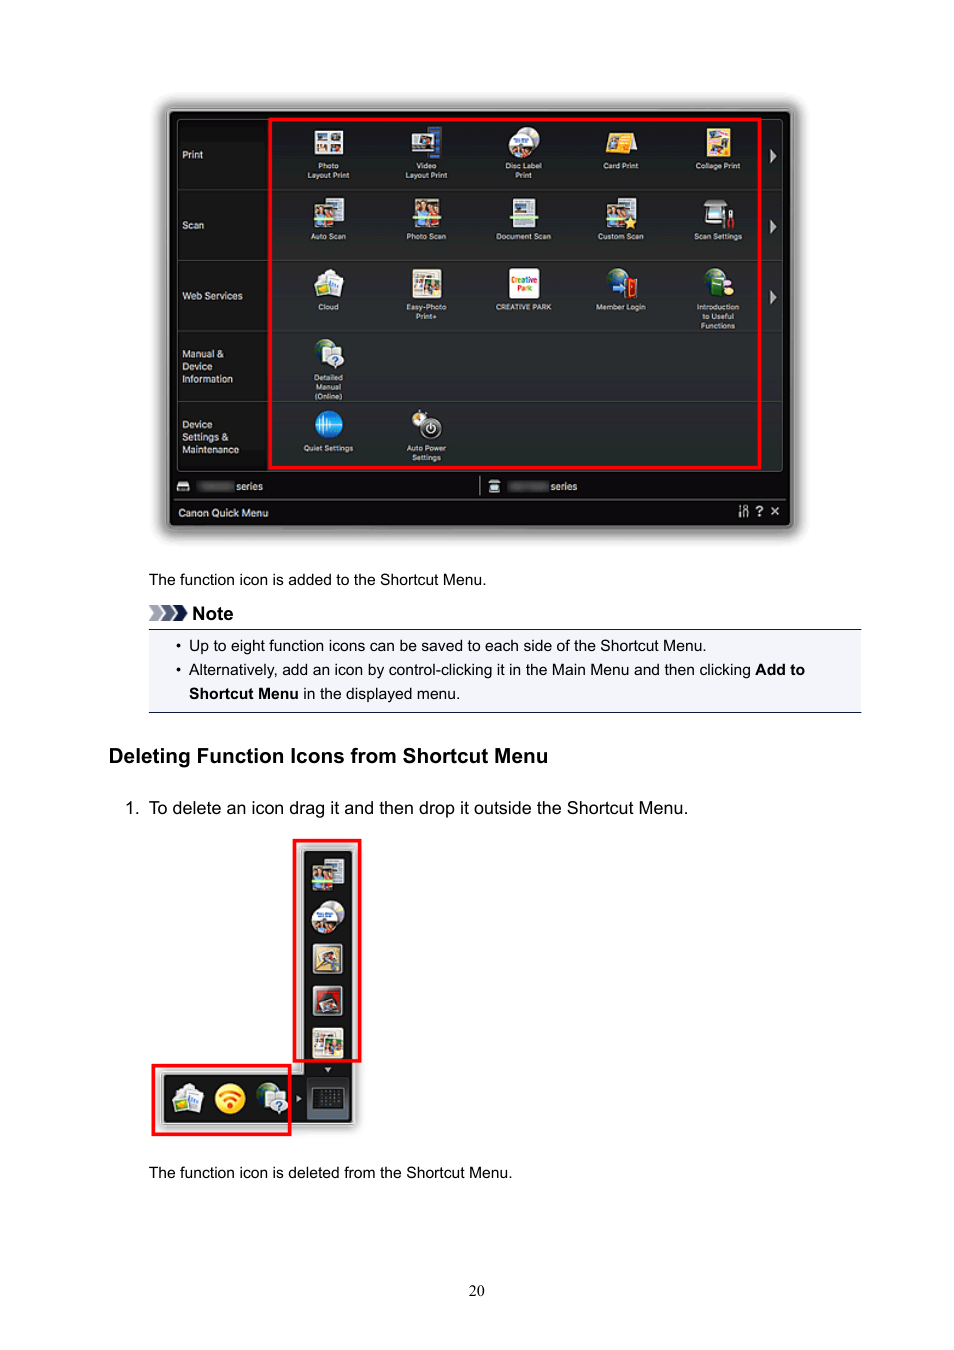 Deleting function icons from shortcut menu | Canon PIXMA E474 User Manual | Page 20 / 22